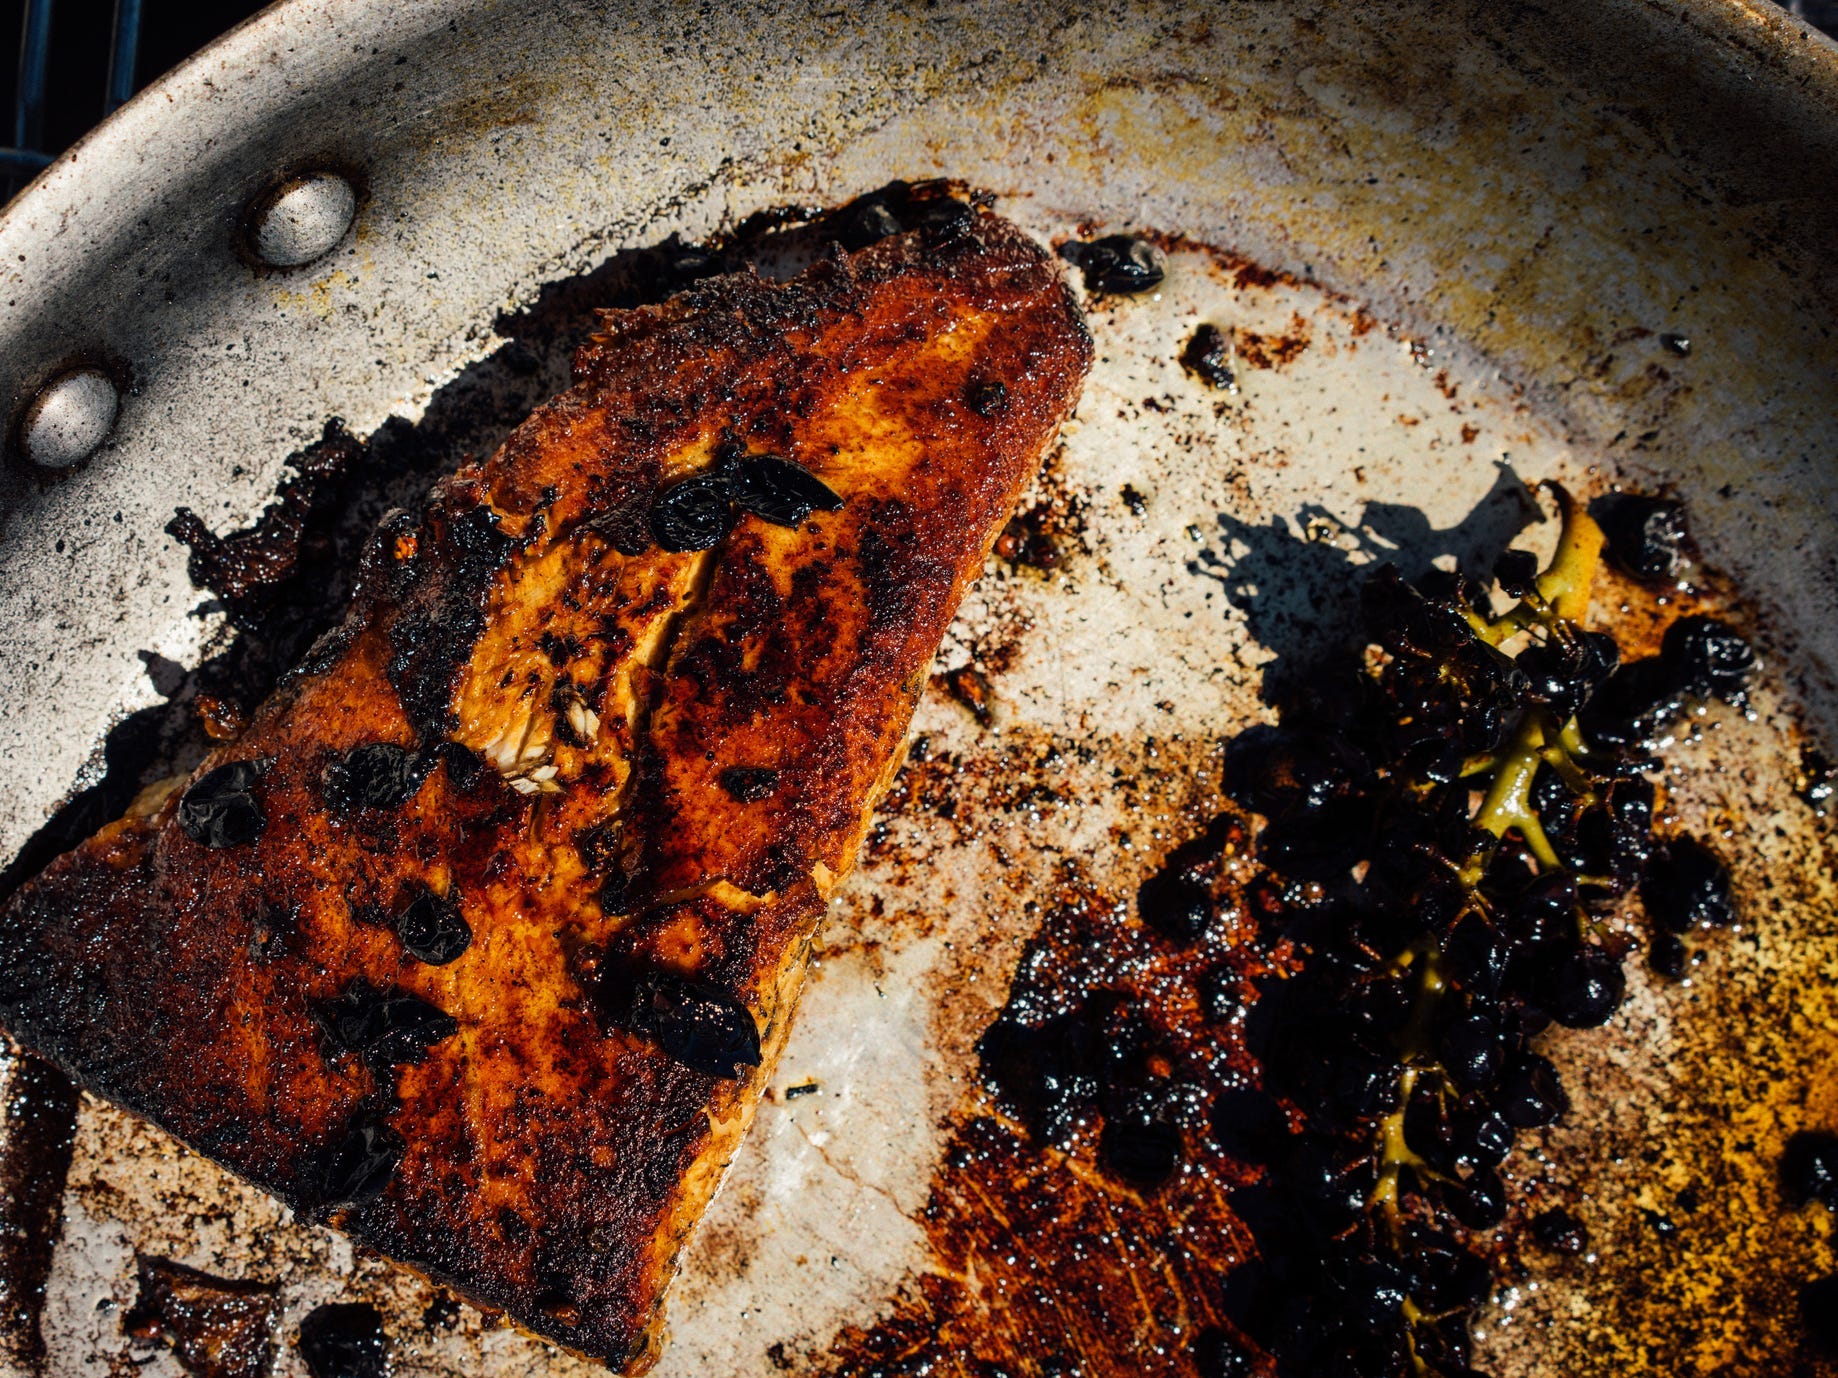 Burnt chicken or fish on a burnt pan